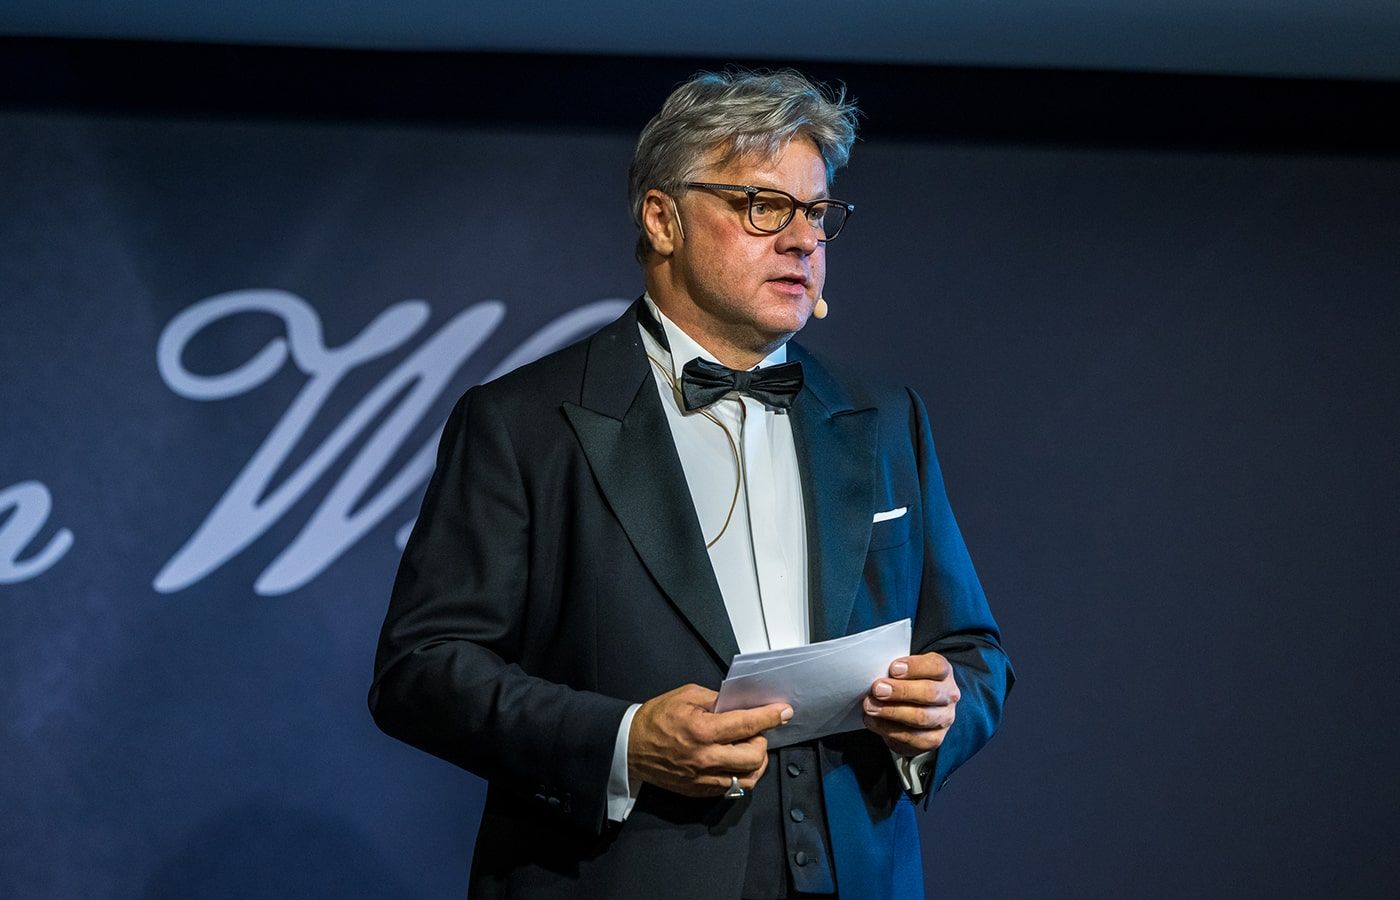 Constantin Wild addresses the gathered VIPs and industry guests at his business' 175th anniversary celebrations